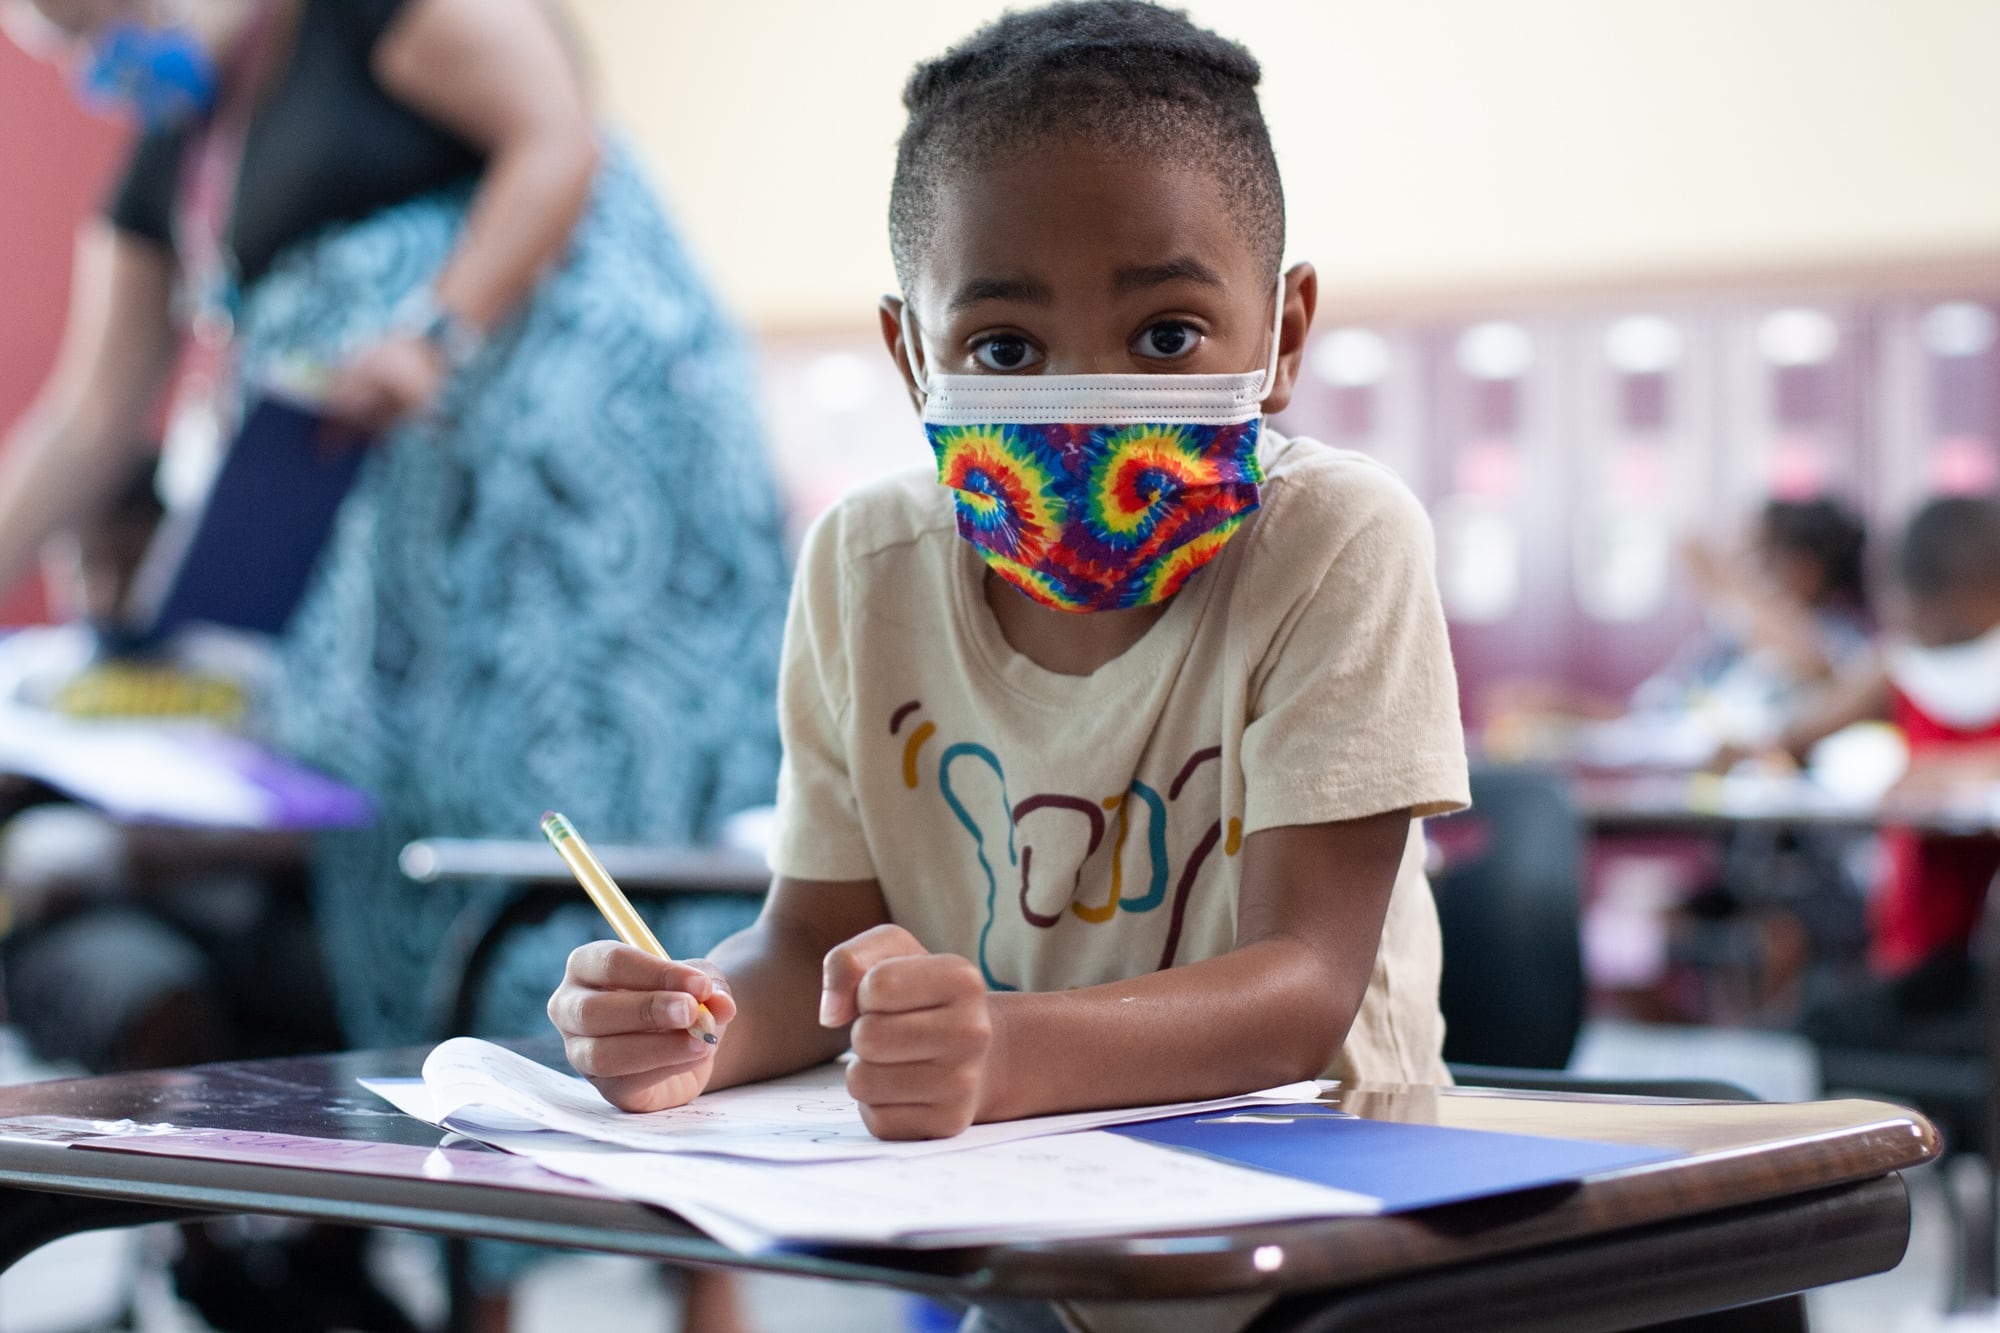 A young boy in a beige shirt with a tie-dye mask looks up at the camera in the middle of writing on a worksheet with a pencil as a teacher helps a student in the background